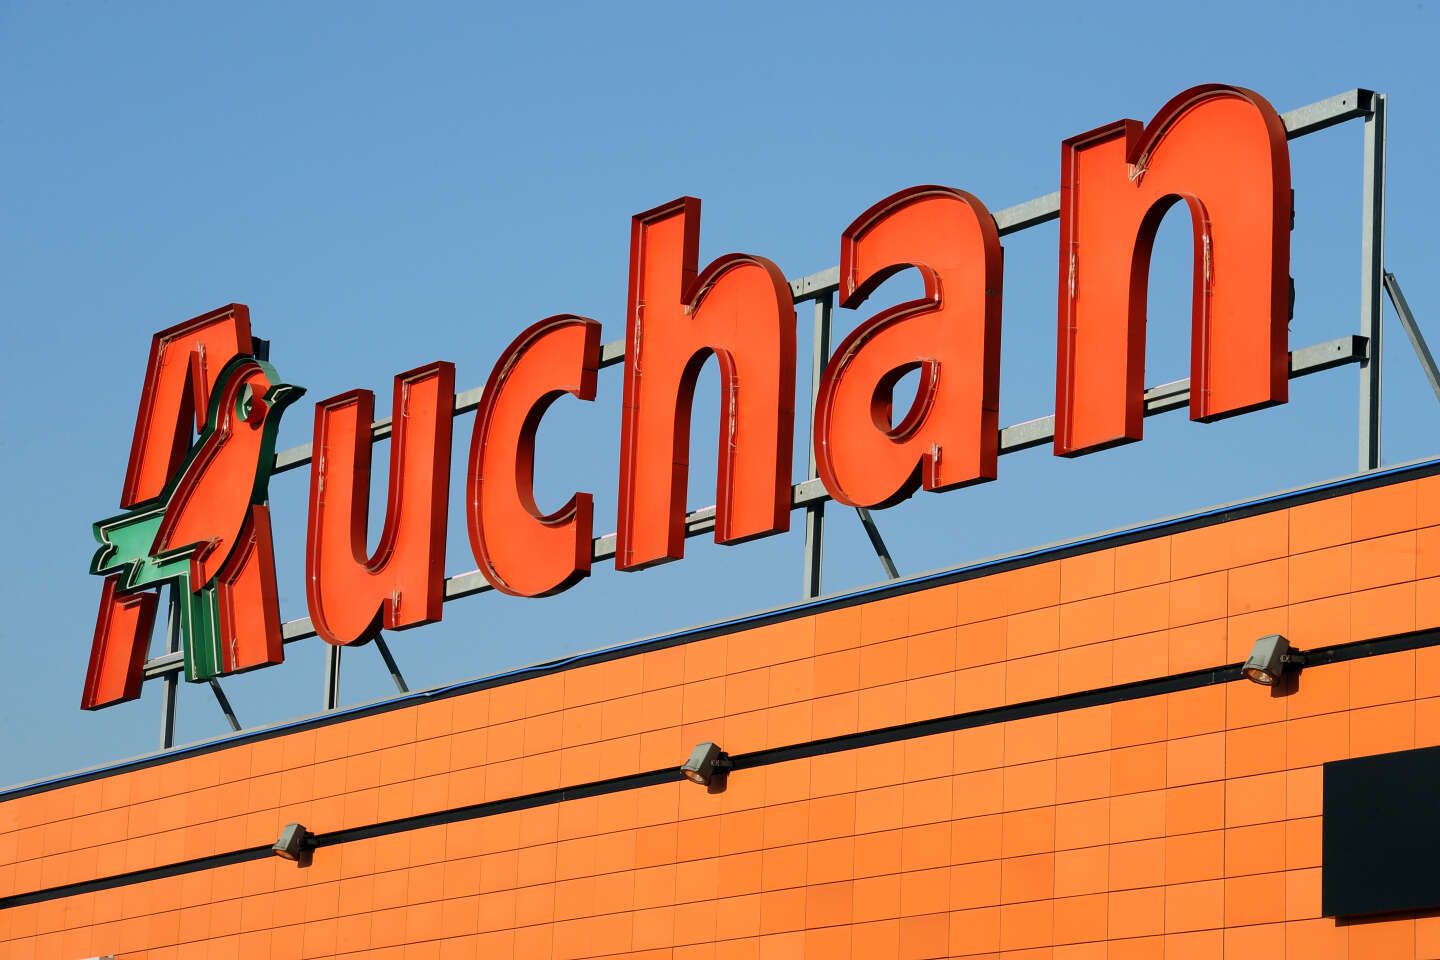 Auchan bought out the activities of the Dia Group in Portugal, i.e. 489 convenience stores